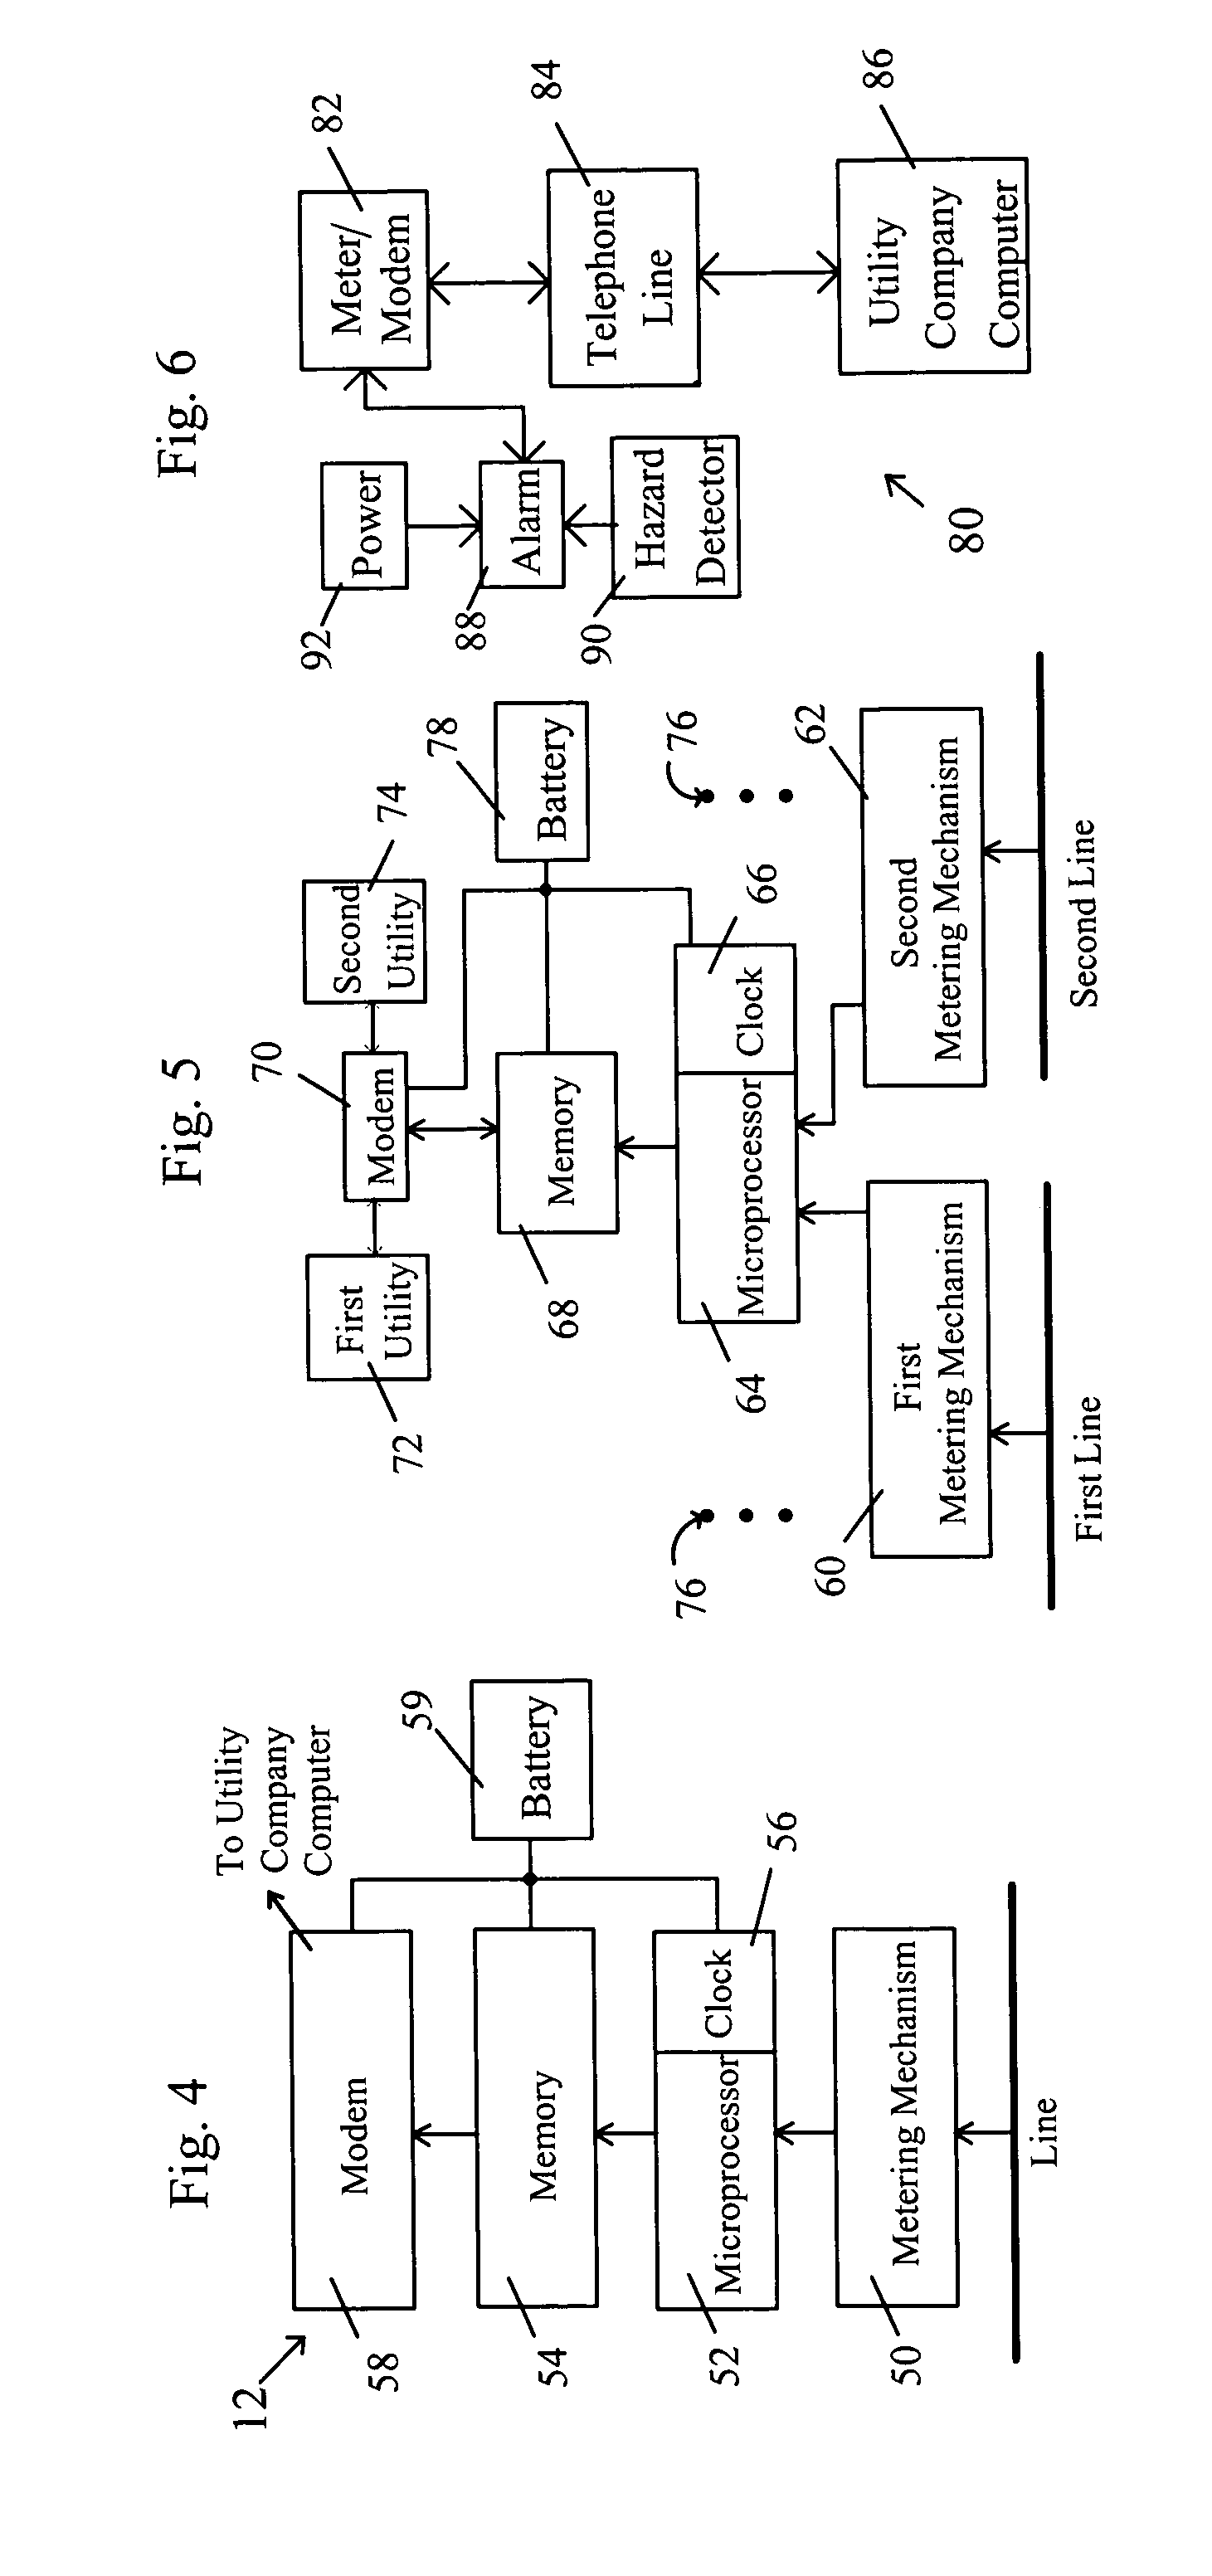 Method and apparatus for all-purpose, automatic remote utility meter reading, utility shut off, and hazard warning and correction